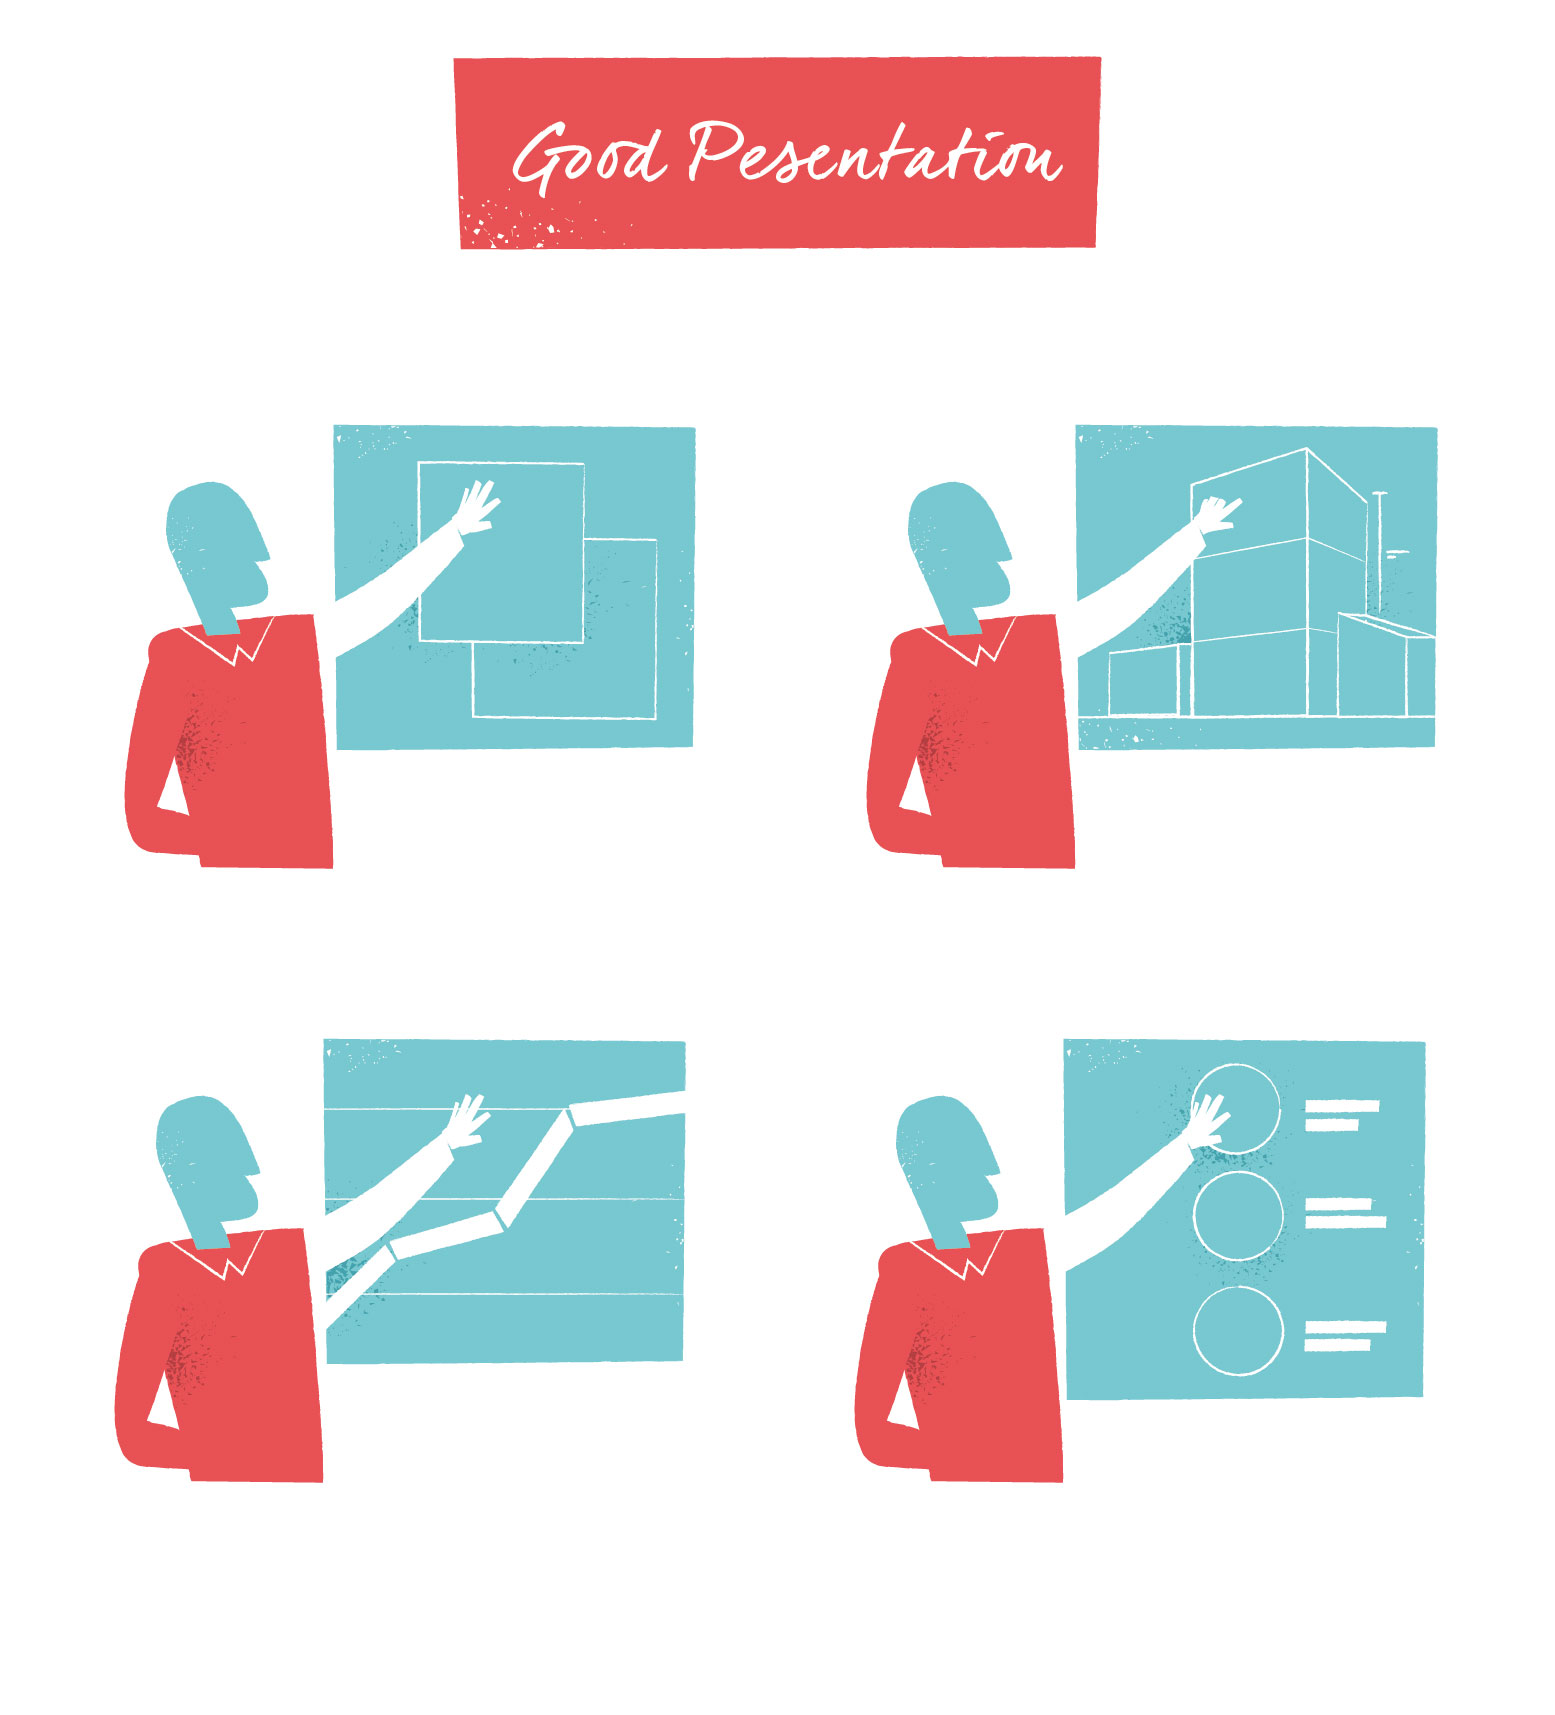 Good Presentation vector art series available for download